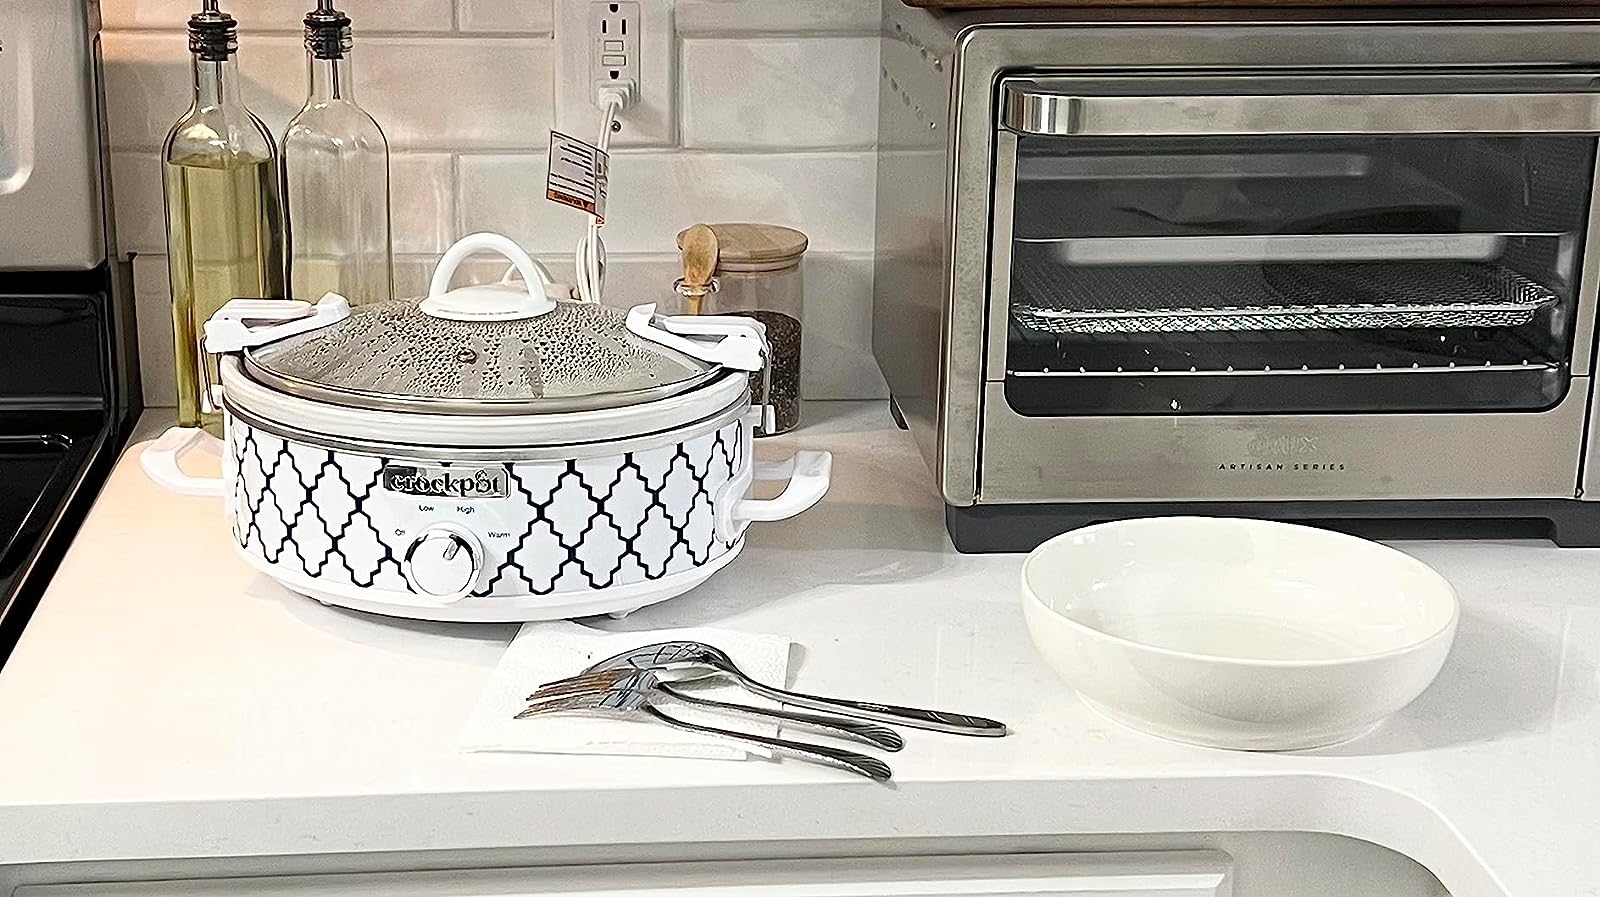 Reviewer image of the patterned slow cooker on their kitchen countertop